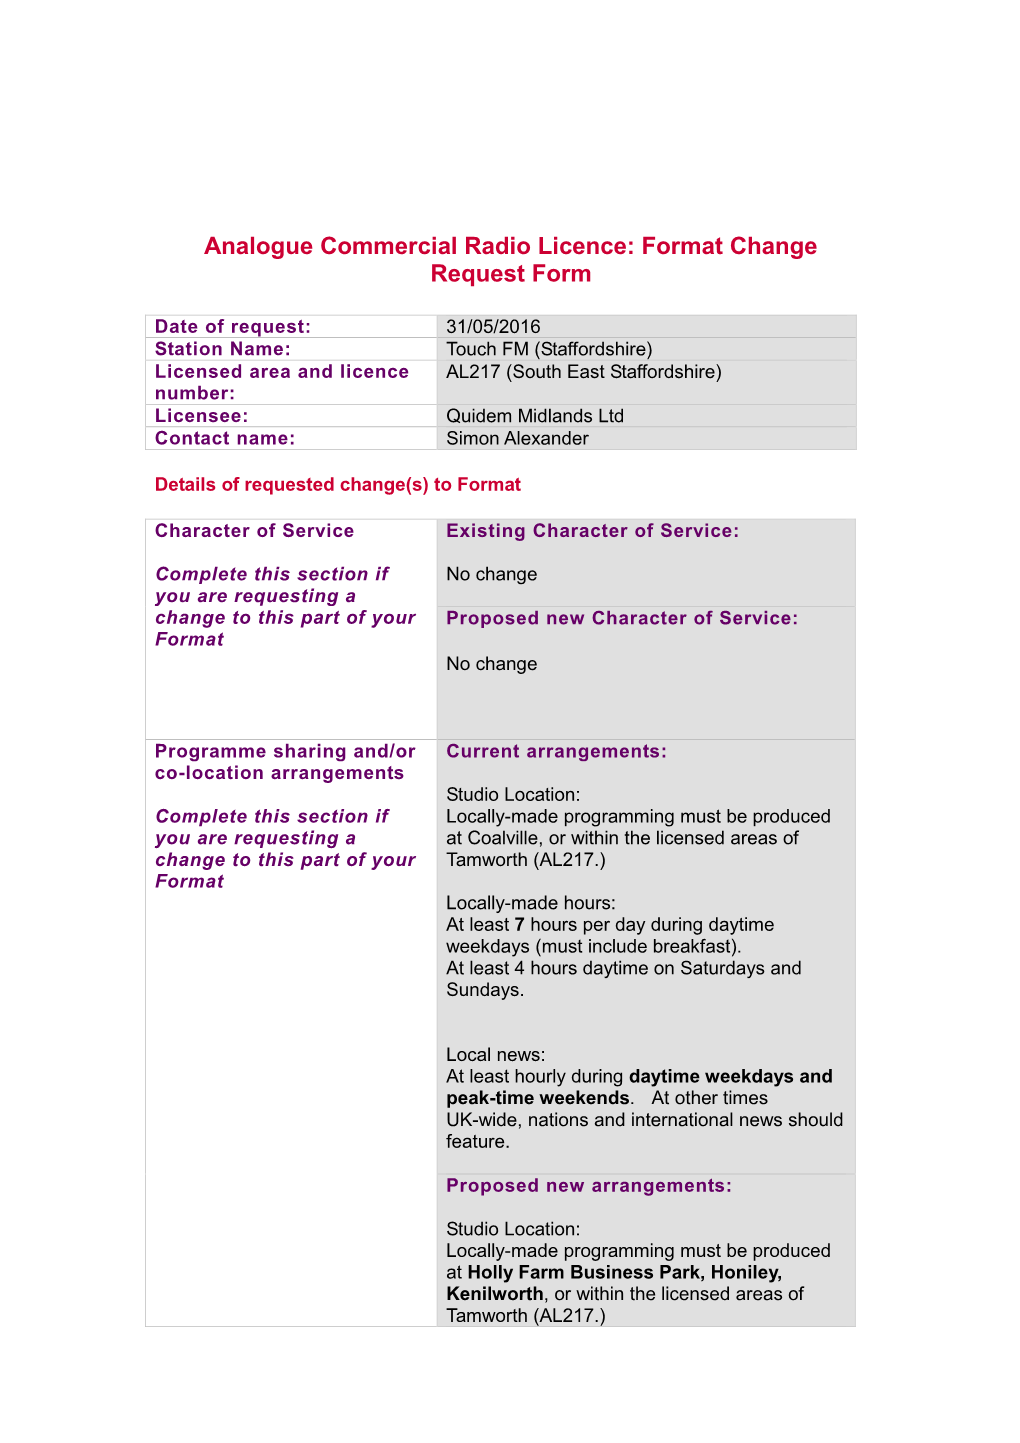 Analogue Commercial Radio Licence: Format Change Request Form